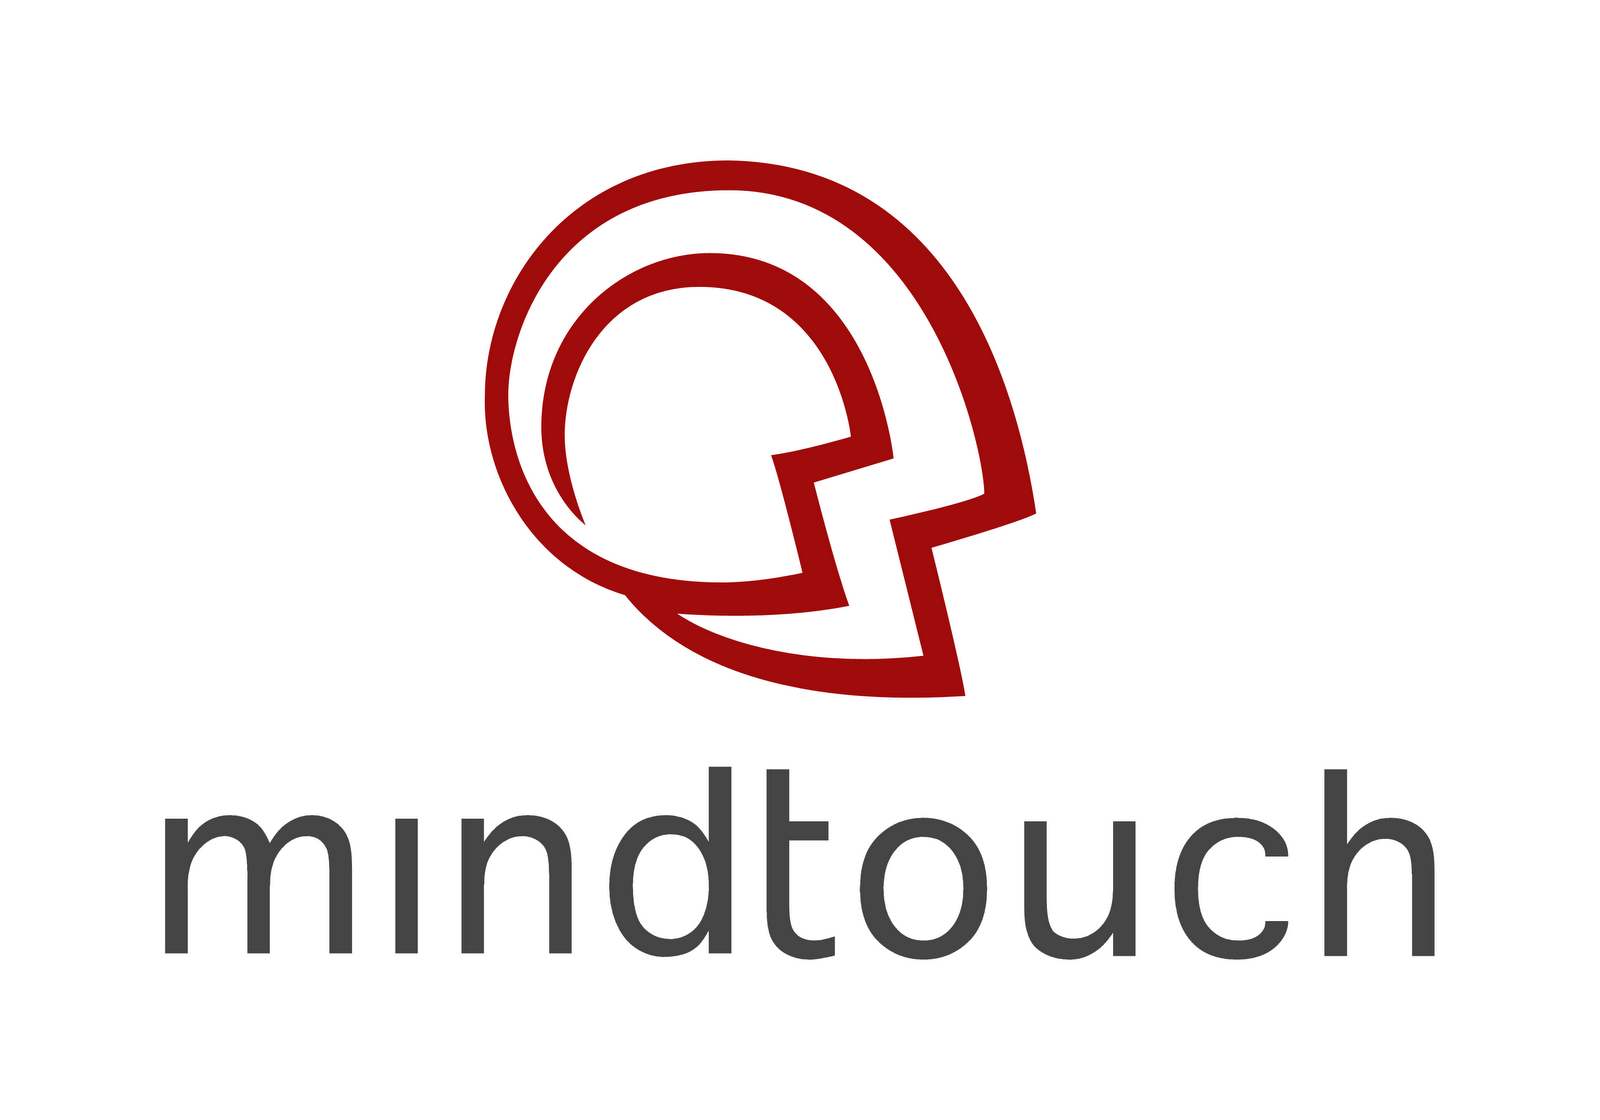 [mindtouch.png]